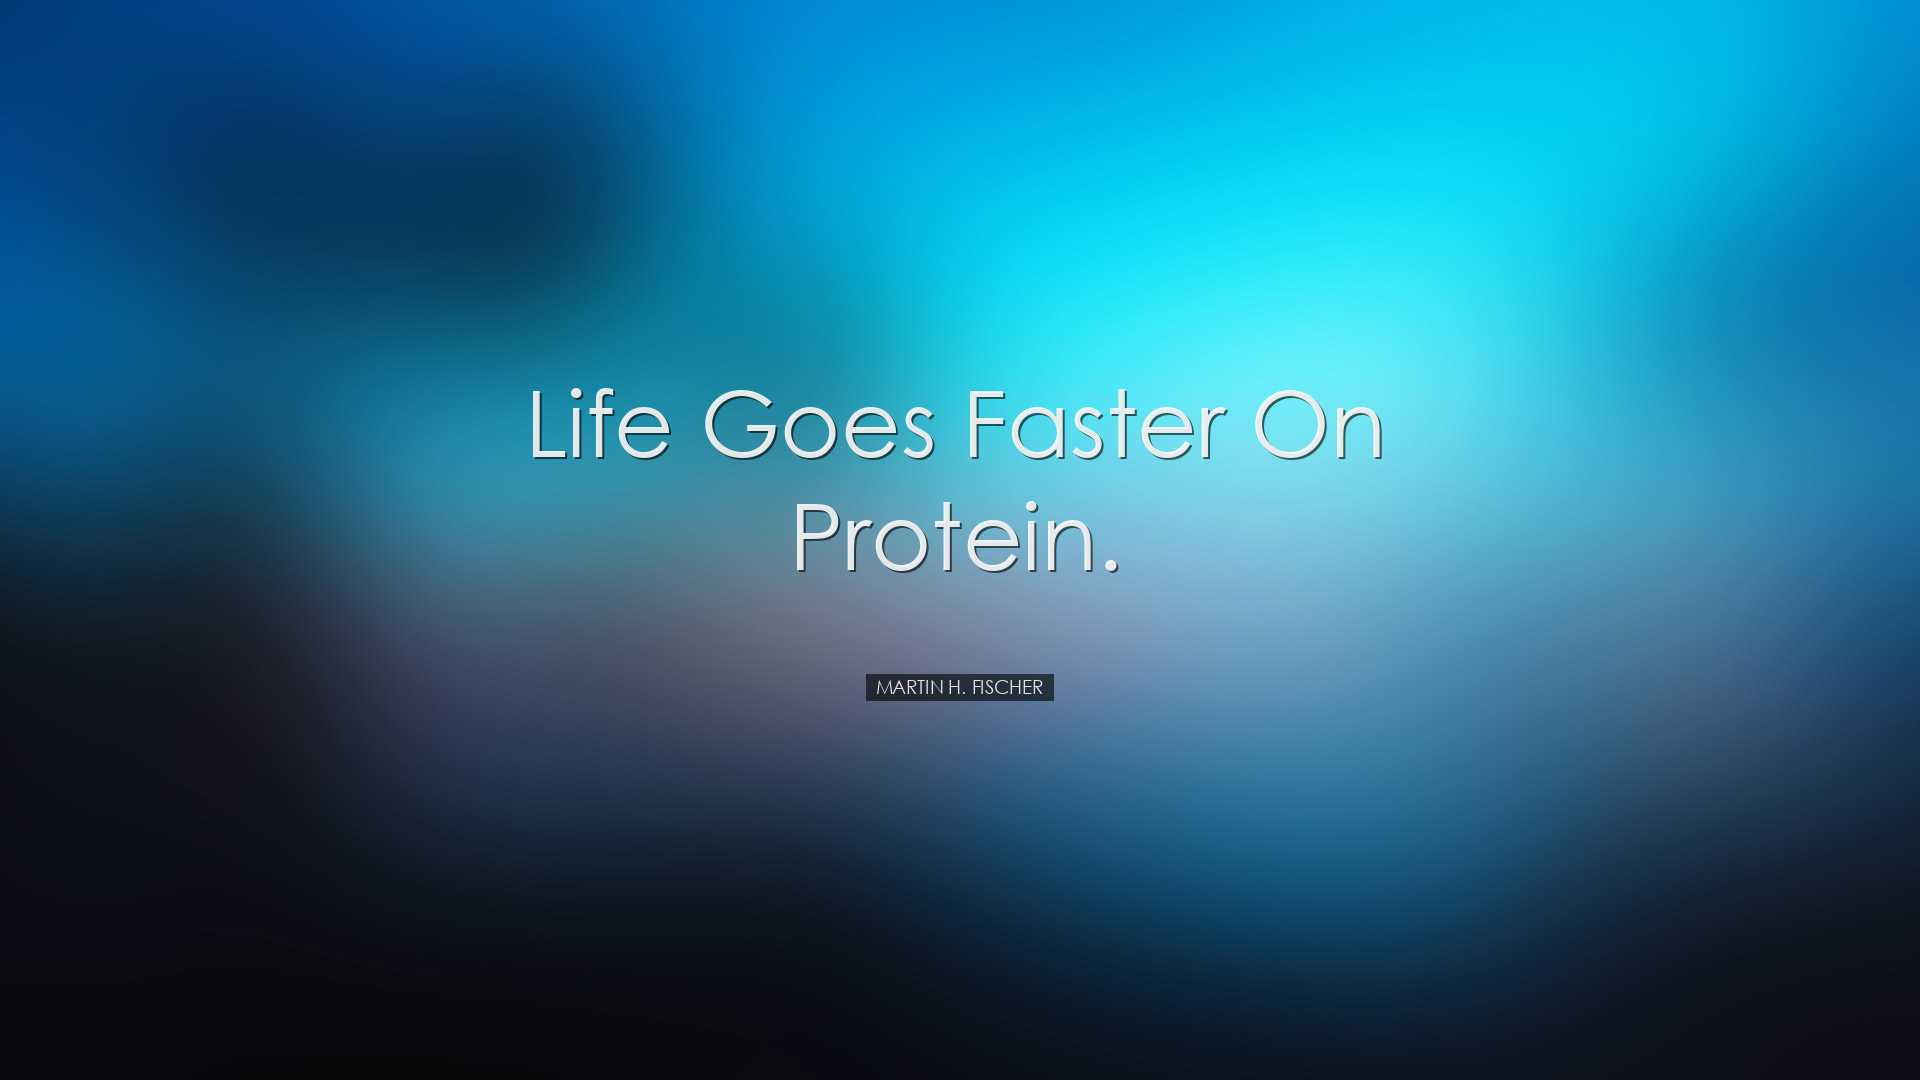 Life goes faster on protein. - Martin H. Fischer